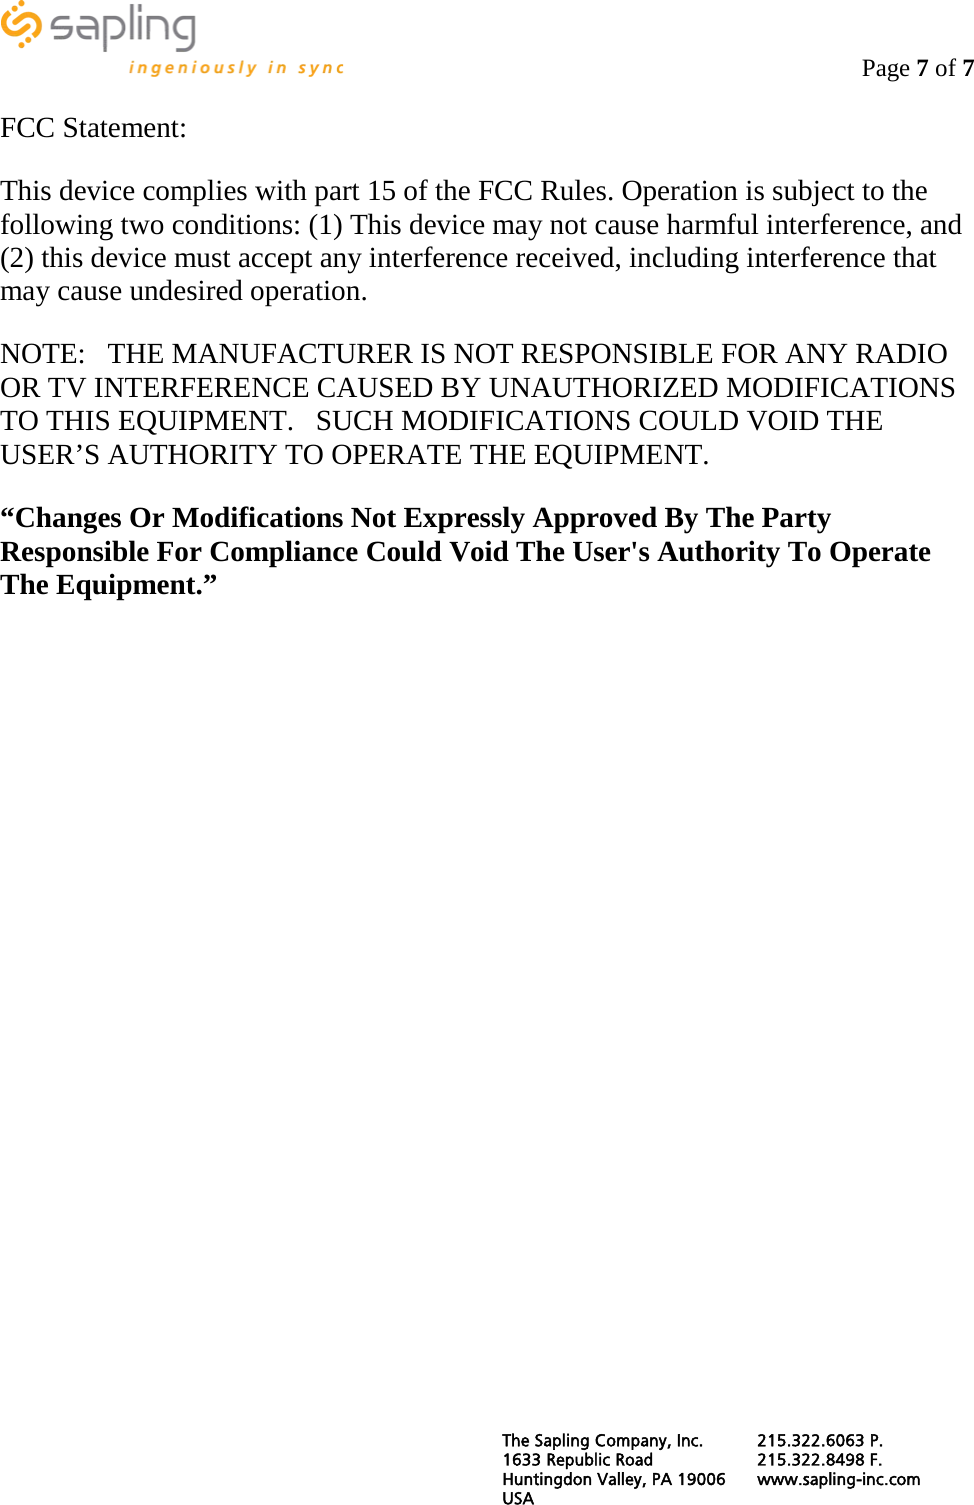                                                                                    Page 7 of 7  FCC Statement: This device complies with part 15 of the FCC Rules. Operation is subject to the following two conditions: (1) This device may not cause harmful interference, and (2) this device must accept any interference received, including interference that may cause undesired operation. NOTE:   THE MANUFACTURER IS NOT RESPONSIBLE FOR ANY RADIO OR TV INTERFERENCE CAUSED BY UNAUTHORIZED MODIFICATIONS TO THIS EQUIPMENT.   SUCH MODIFICATIONS COULD VOID THE USER’S AUTHORITY TO OPERATE THE EQUIPMENT. “Changes Or Modifications Not Expressly Approved By The Party Responsible For Compliance Could Void The User&apos;s Authority To Operate The Equipment.” The Sapling Company, Inc. 215.322.6063 P. 1633 Republic Road 215.322.8498 F. Huntingdon Valley, PA 19006 www.sapling-inc.com USA   